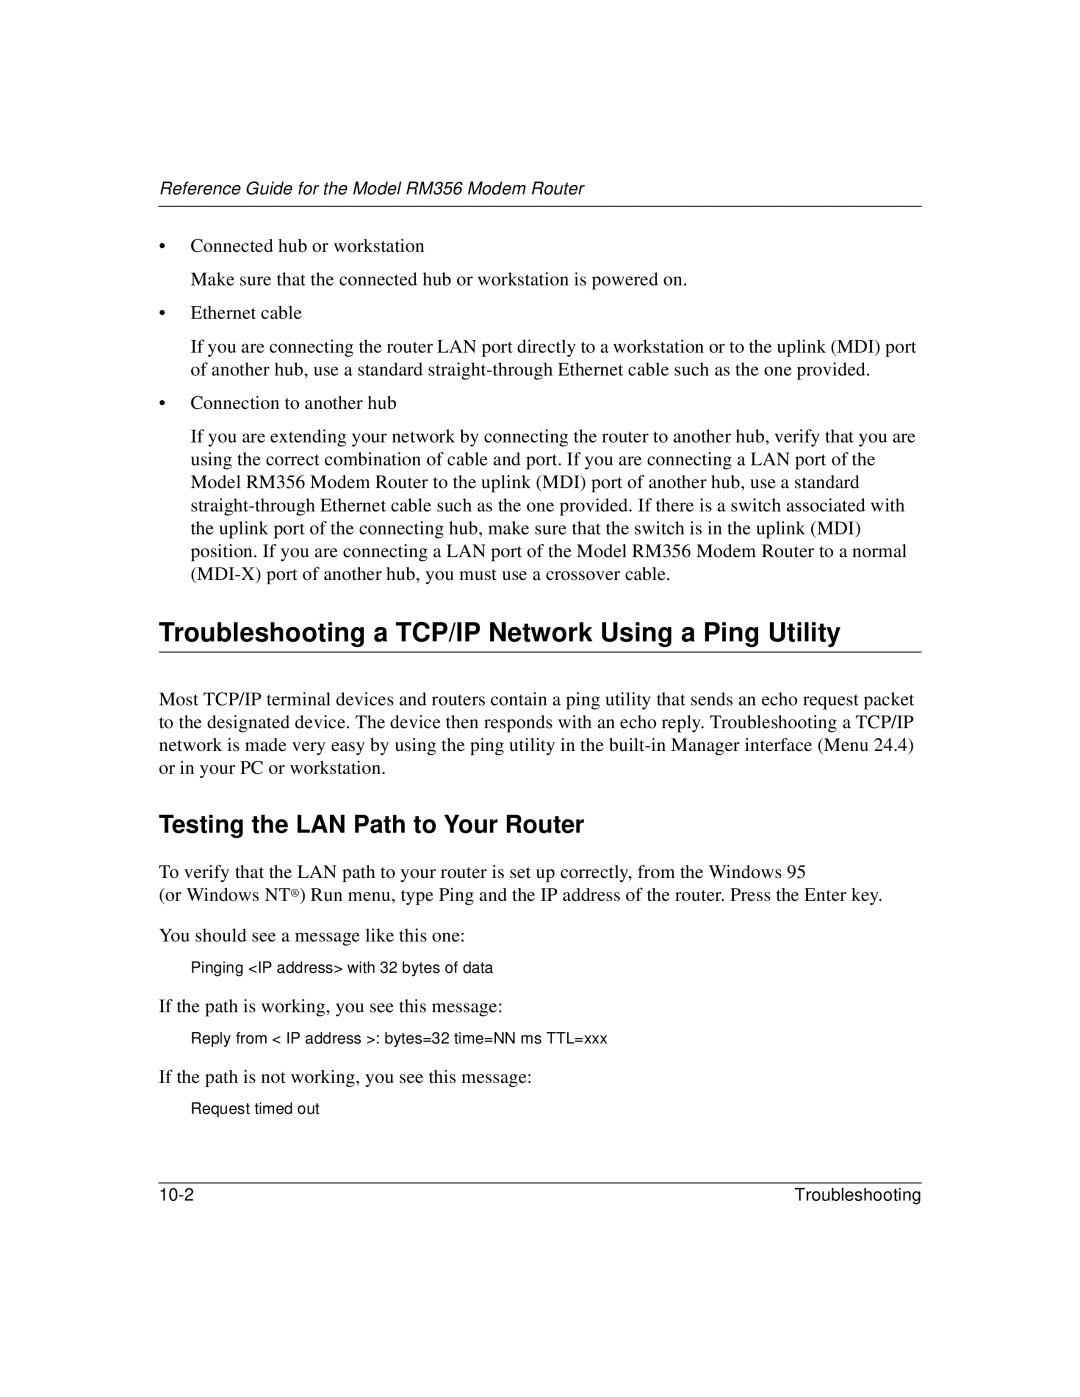 Bay Technical Associates RM356 Troubleshooting a TCP/IP Network Using a Ping Utility, Testing the LAN Path to Your Router 